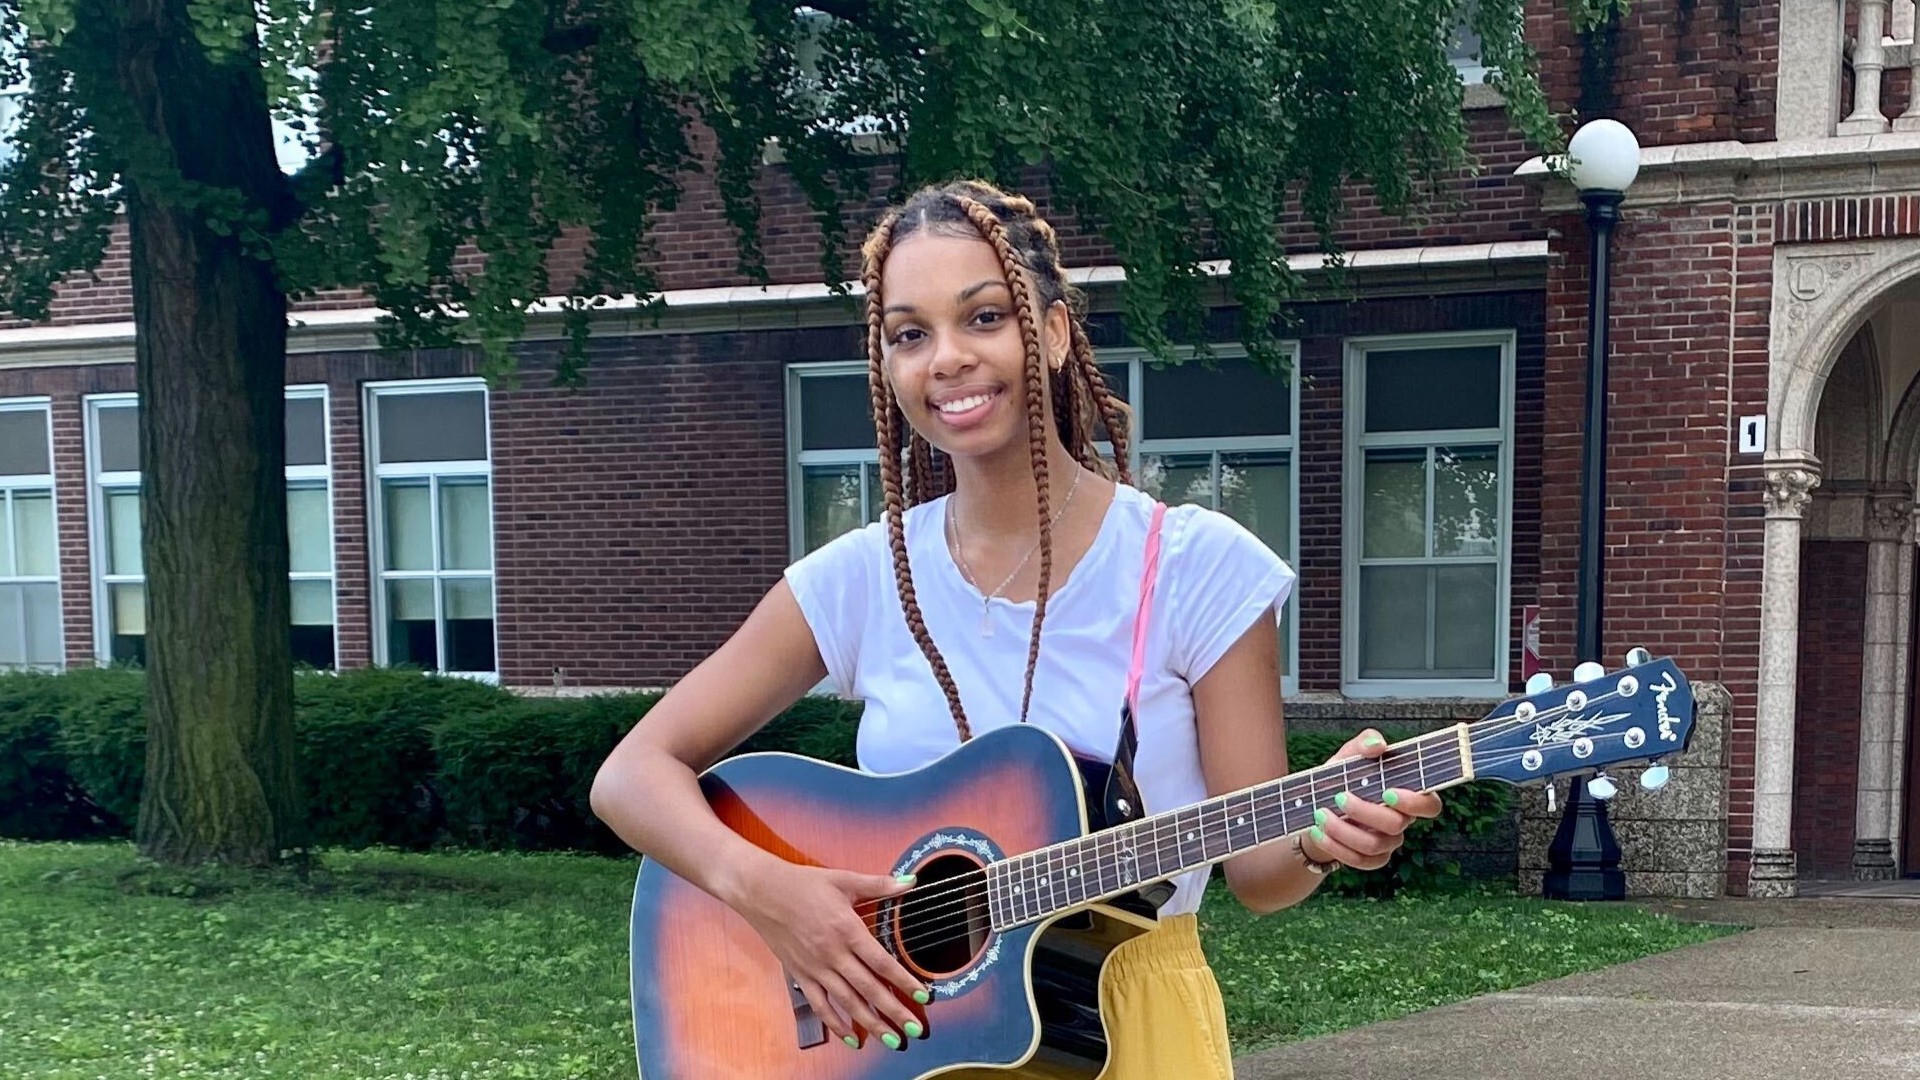 Taylor Hall, a BSU communications major, has released a song that is close to her heart